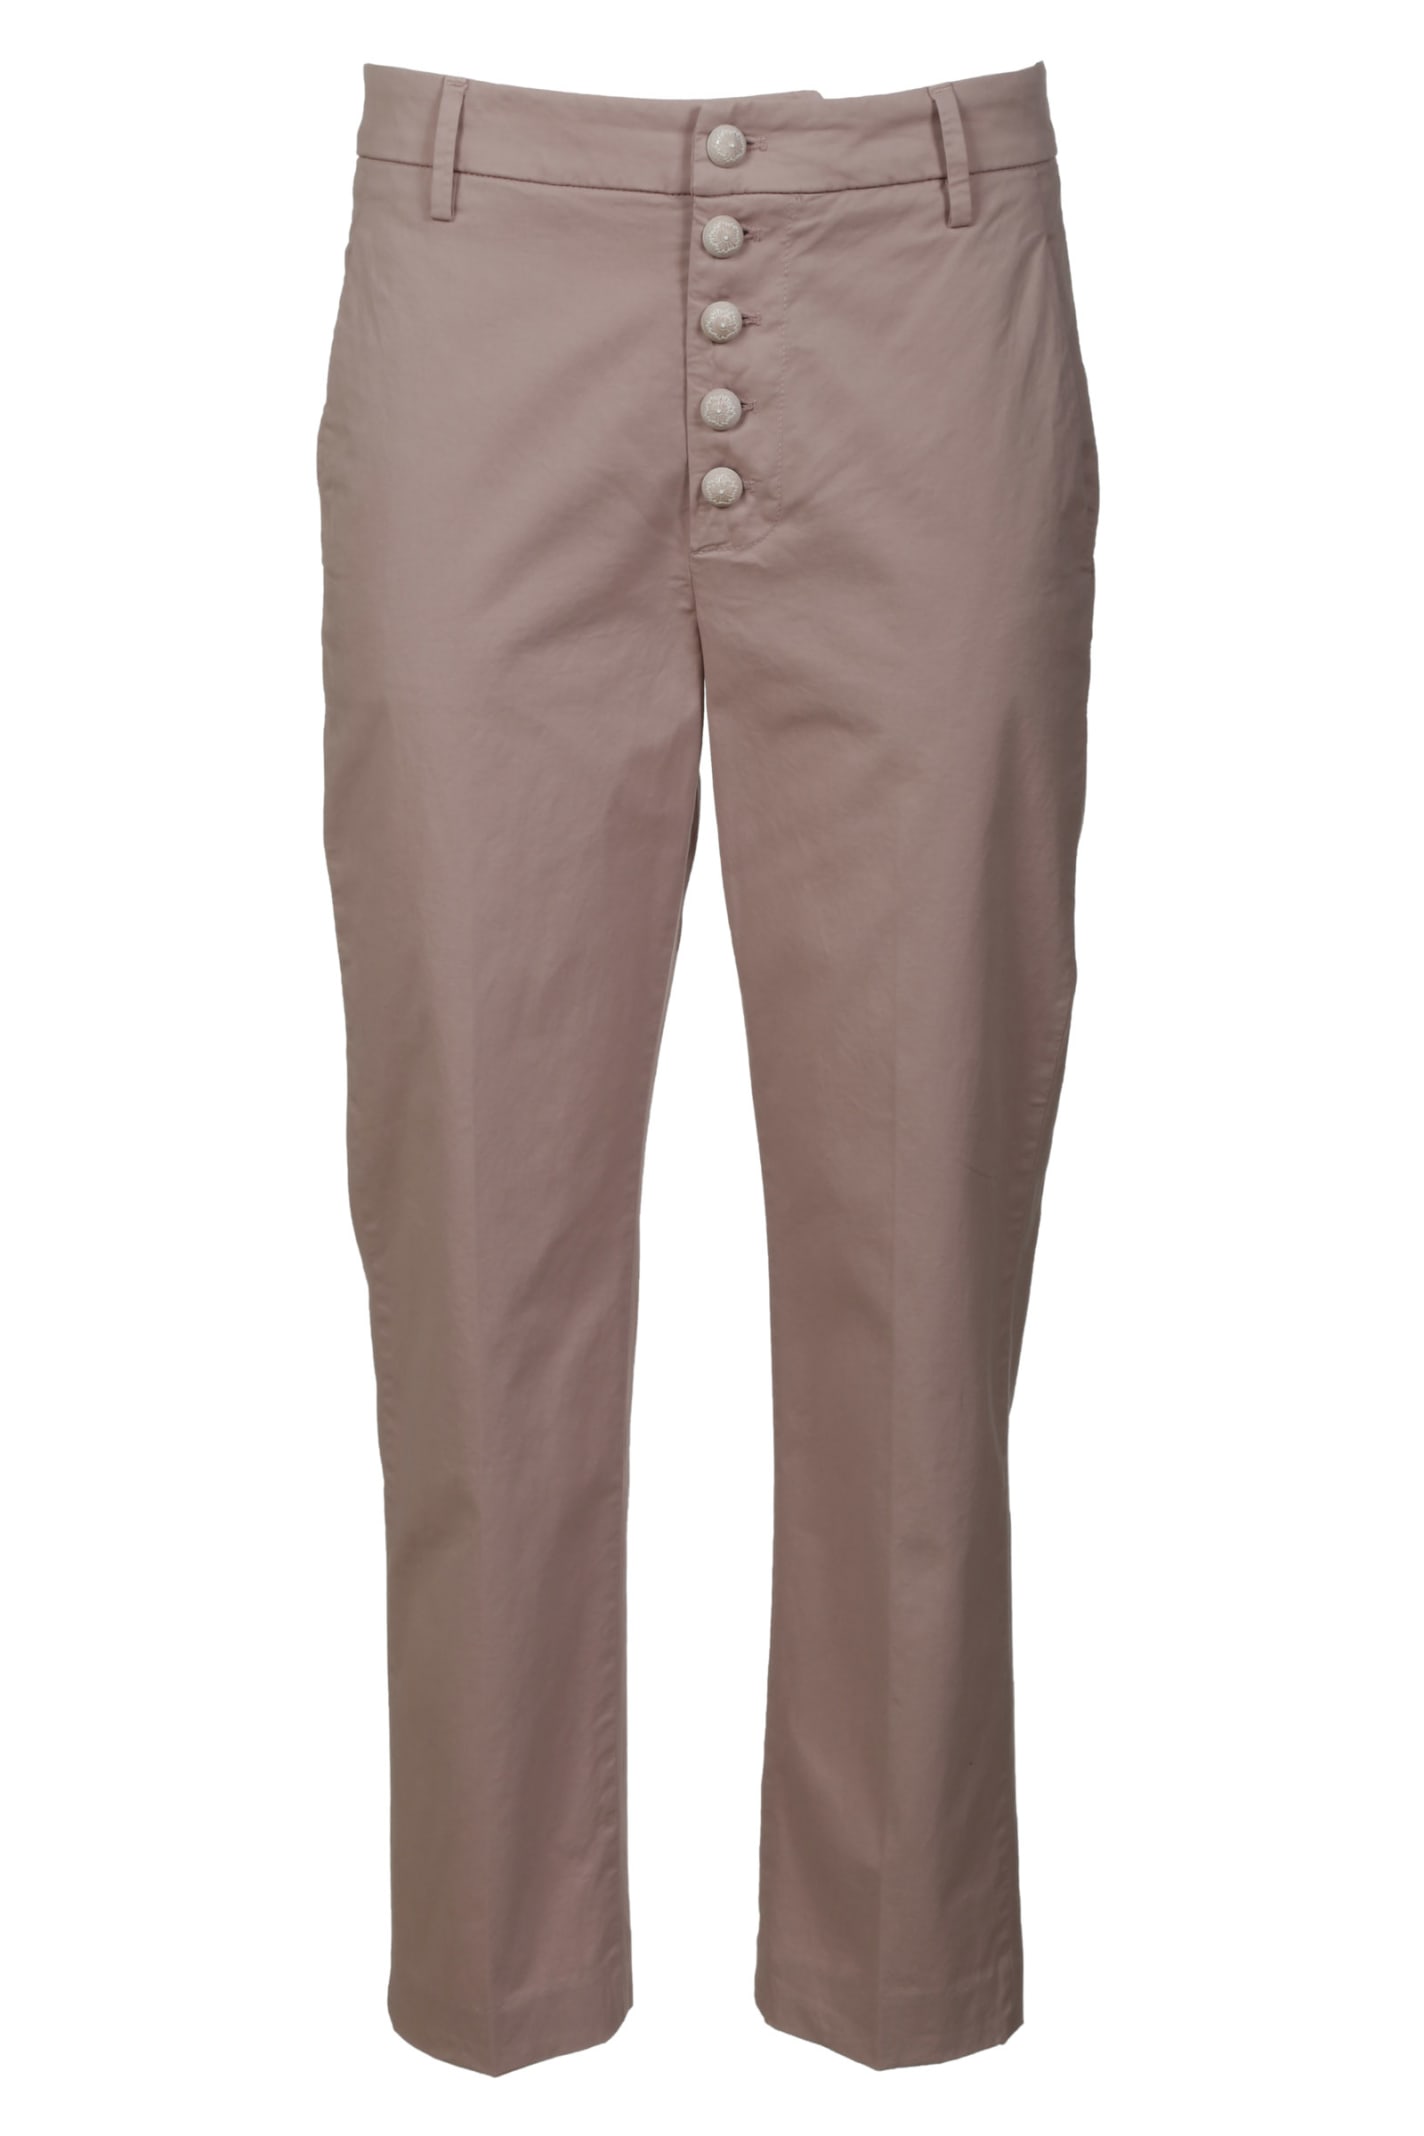 Dondup Buttoned Trousers